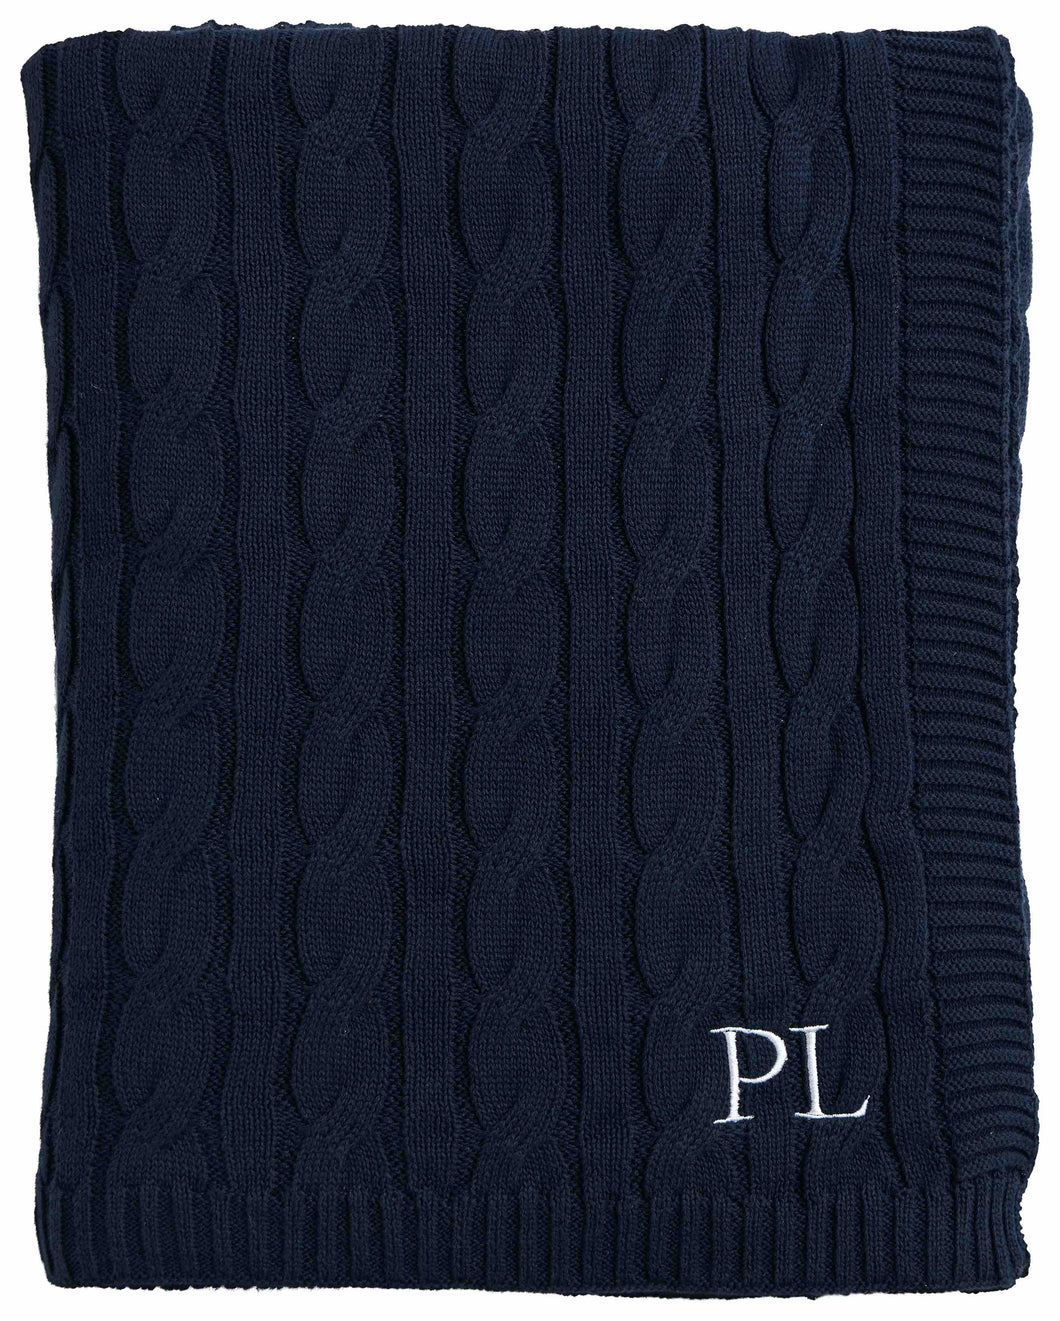 Cable knit navy throw (130 x 170)